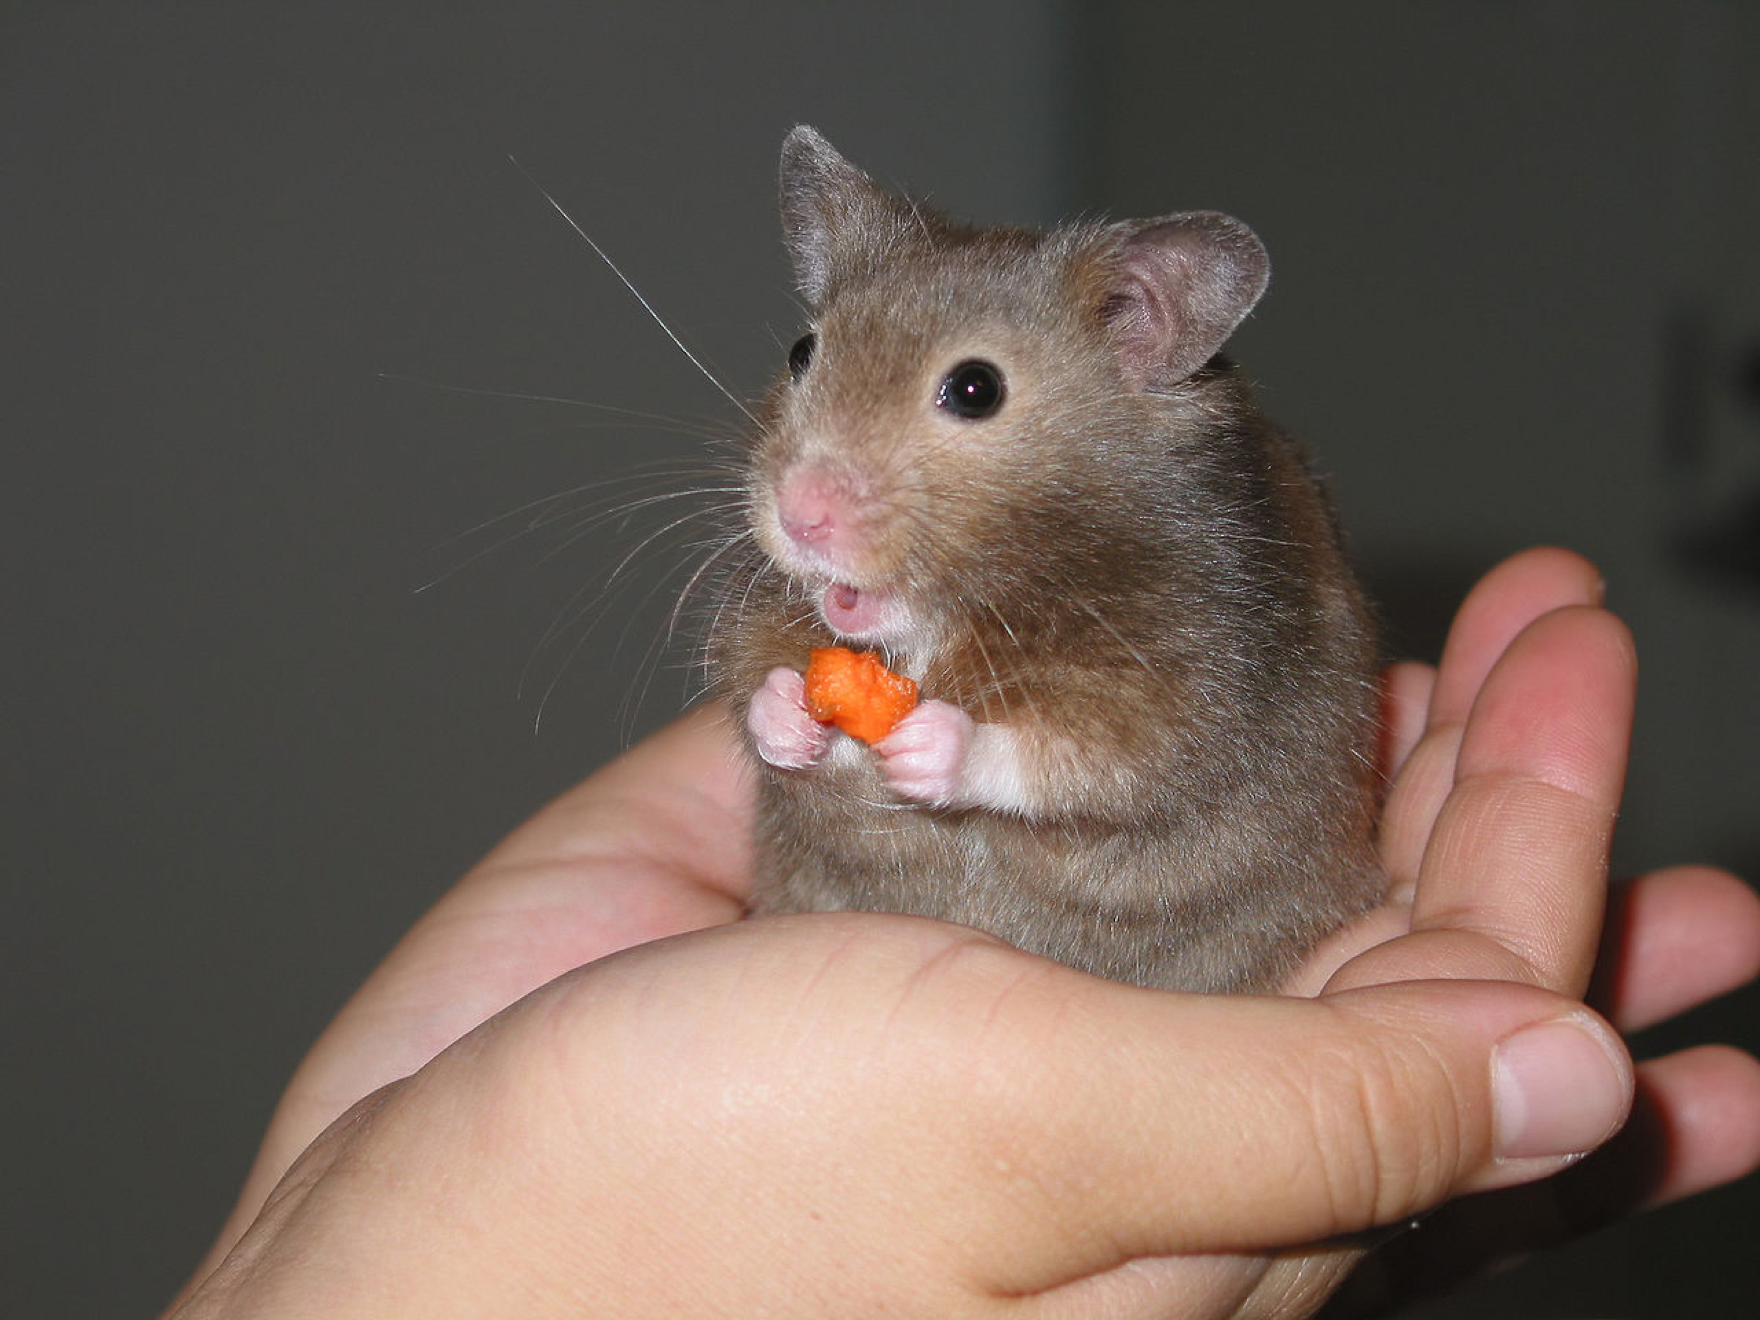 An image of a hamster, held in the palm of a hand.